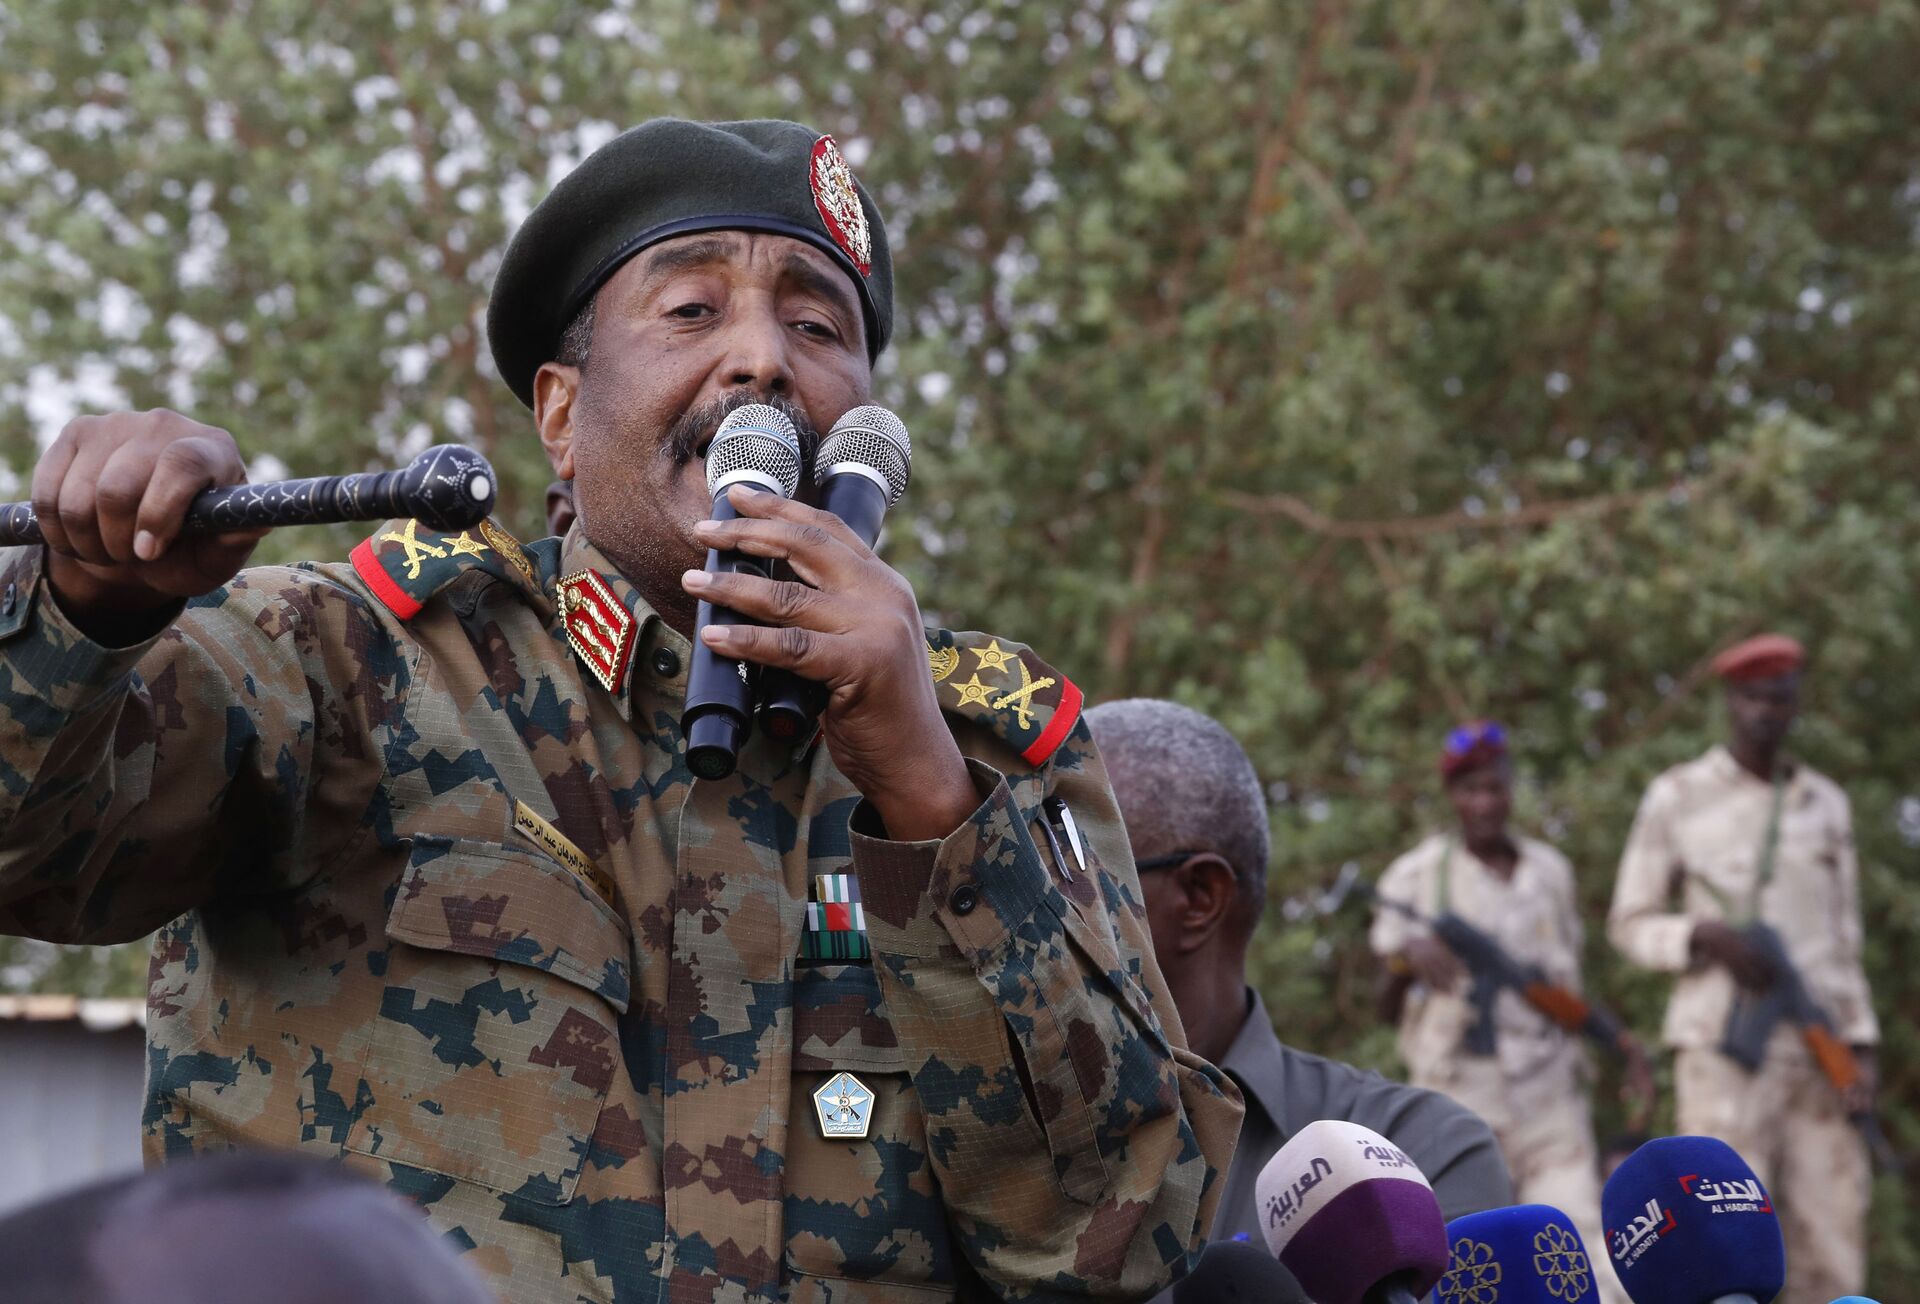 In this June 29, 2019, file photo, Sudanese Gen. Abdel-Fattah Burhan, head of the military council, speaks during a military-backed rally, in Omdurman district, west of Khartoum, Sudan. An African Union envoy says Sudan's ruling military council and the country's pro-democracy movement have reached a power-sharing agreement, including a timetable for a transition to civilian rule. Mohammed el-Hassan Labat said early Friday, July 5, that both sides agreed to form a joint sovereign council that will rule the country for three years or a little more. The sides agreed to five seats for the military and five for civilians with an additional seat going to a civilian with military background. - Sputnik International, 1920, 27.10.2021